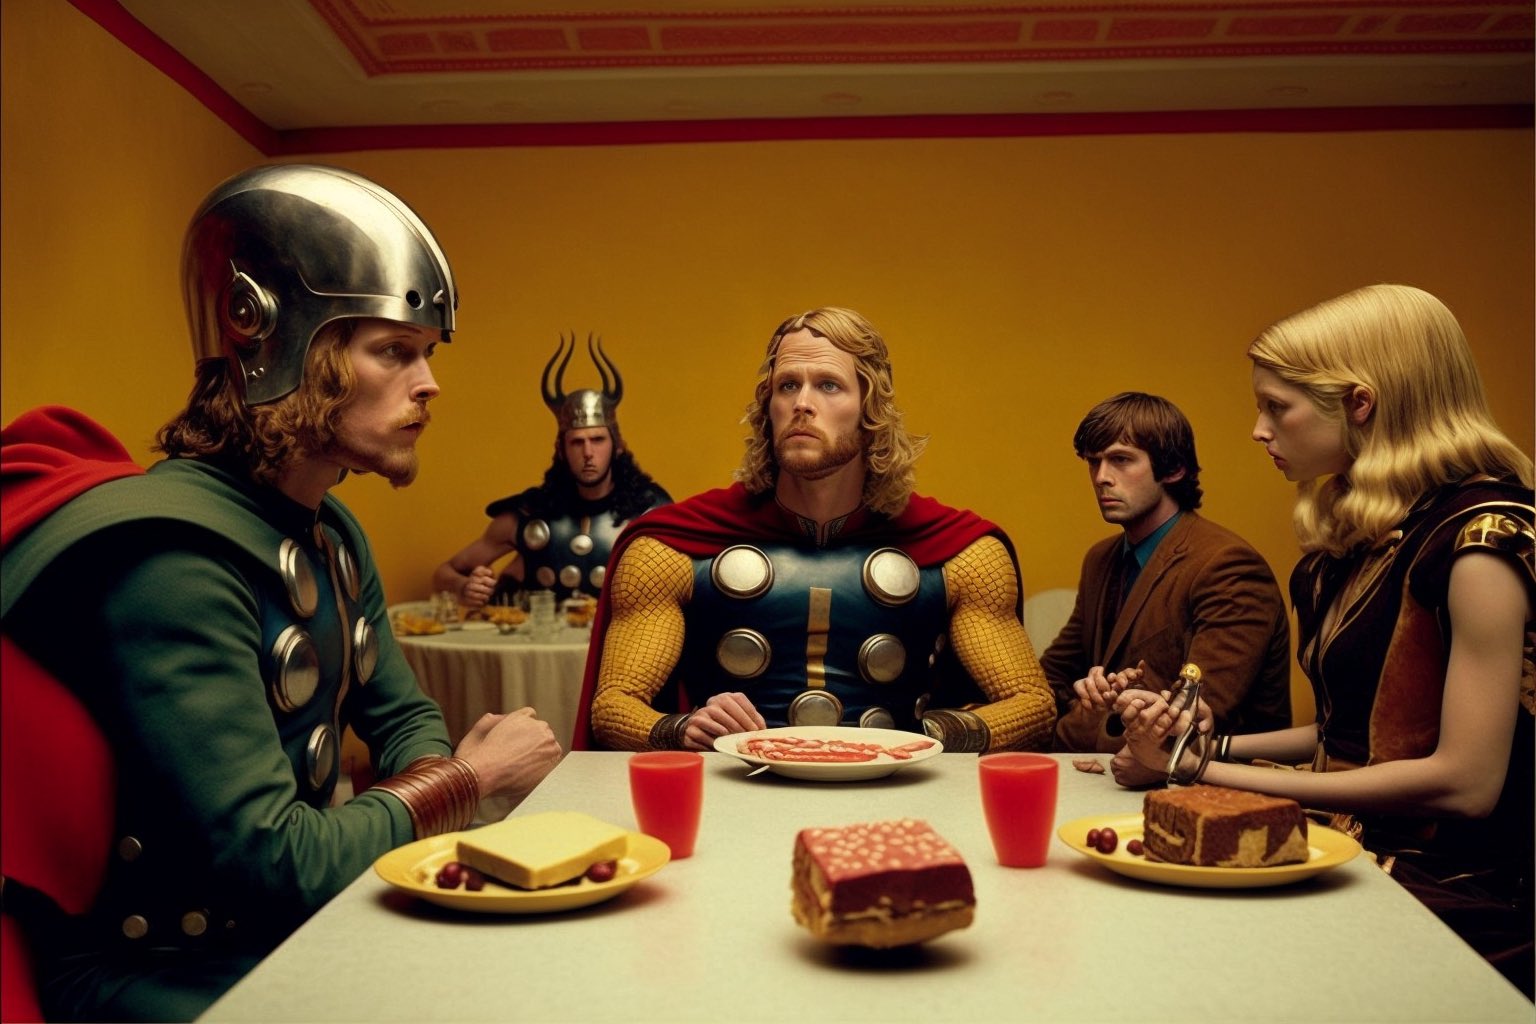 The Avengers 1980 directed by Wes Anderson - Midjourney V4 image generator version